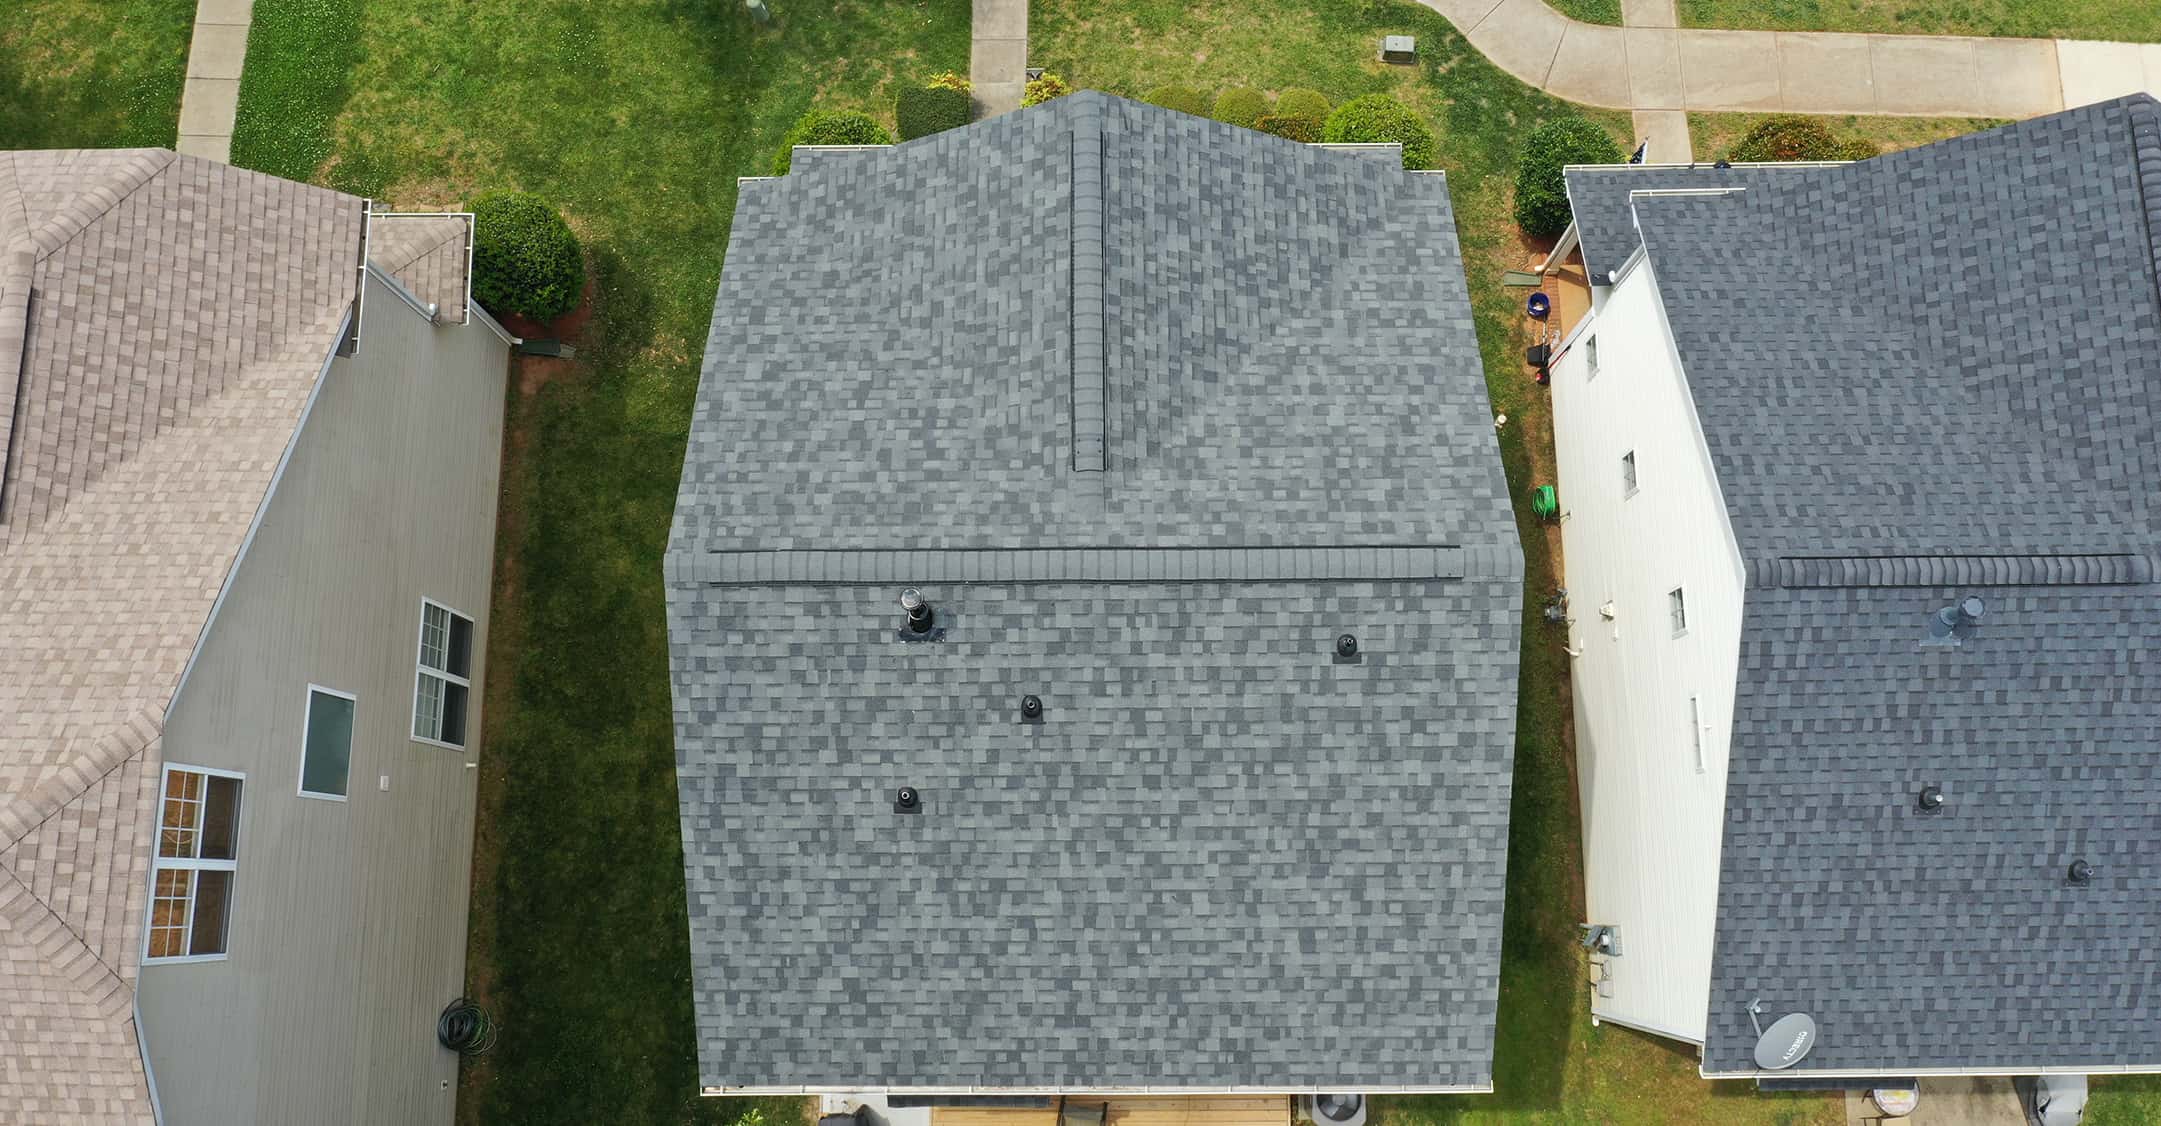 http://top%20aerial%20view%20of%20residential%20home%20with%20oakridge%20trudefinition%20estate%20gray%20shingles